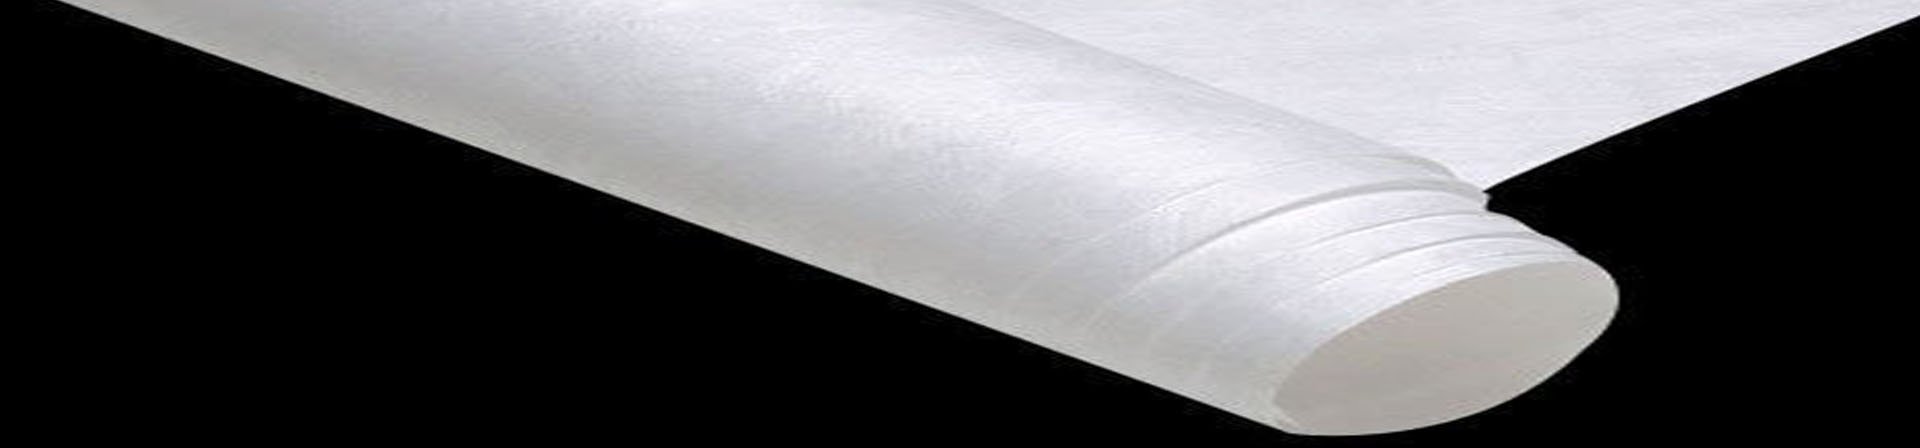 GEOTEXTILE AND GEO MEMBRANE